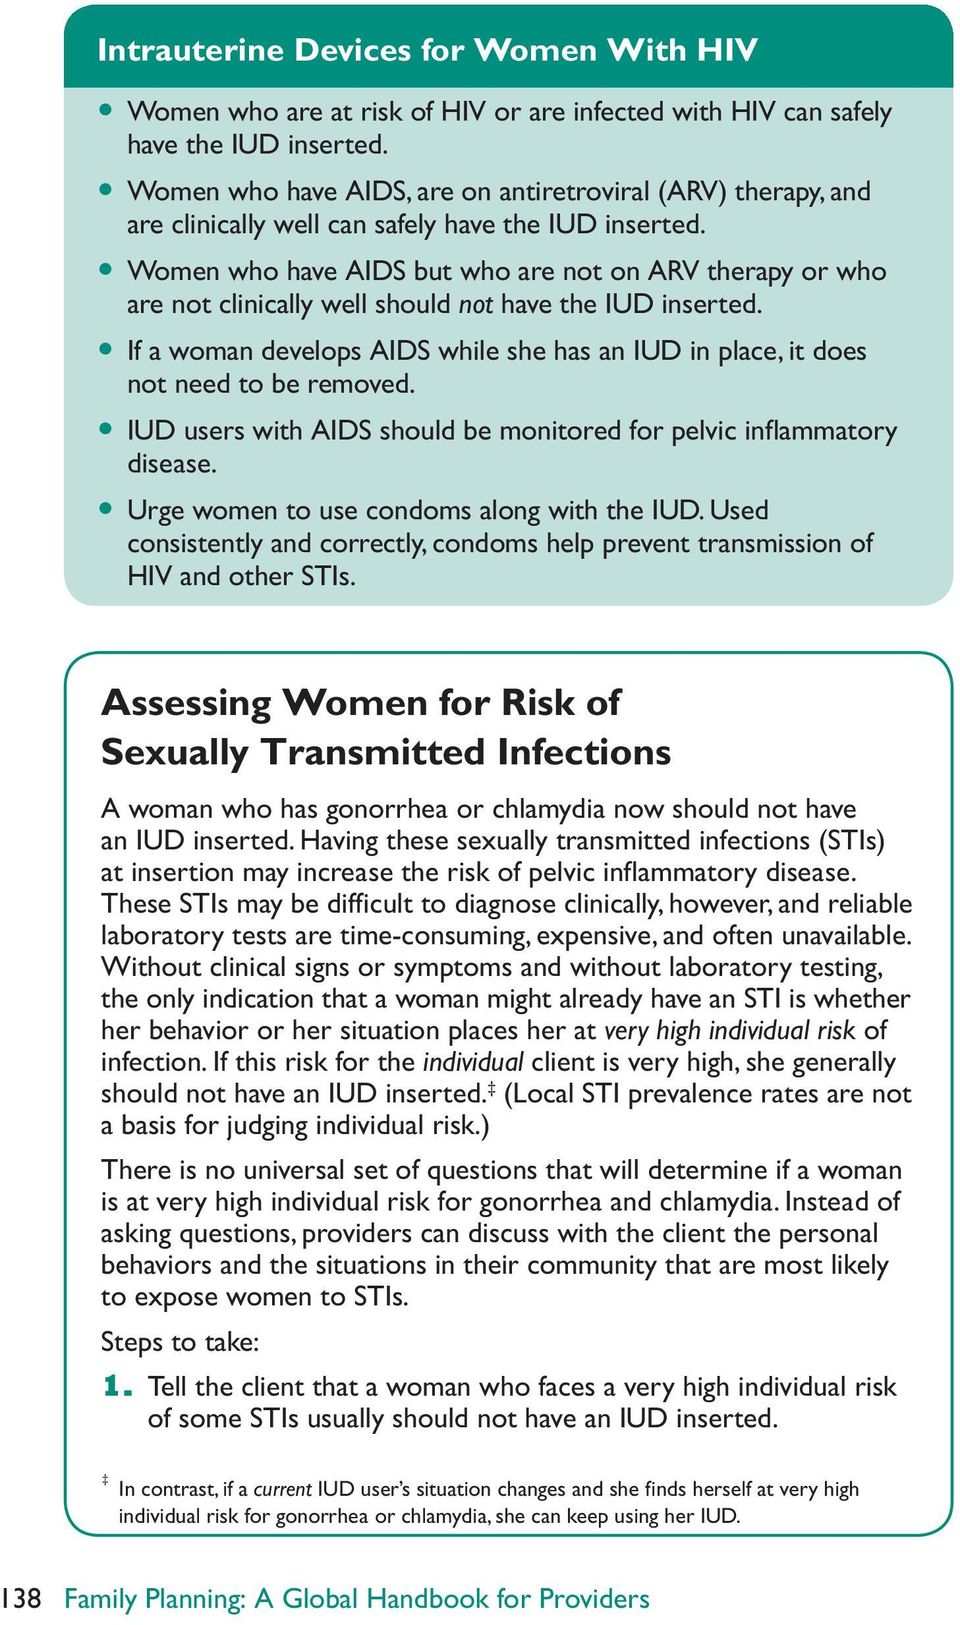 y Women who have AIDS but who are not on ARV therapy or who are not clinically well should not have the IUD inserted.